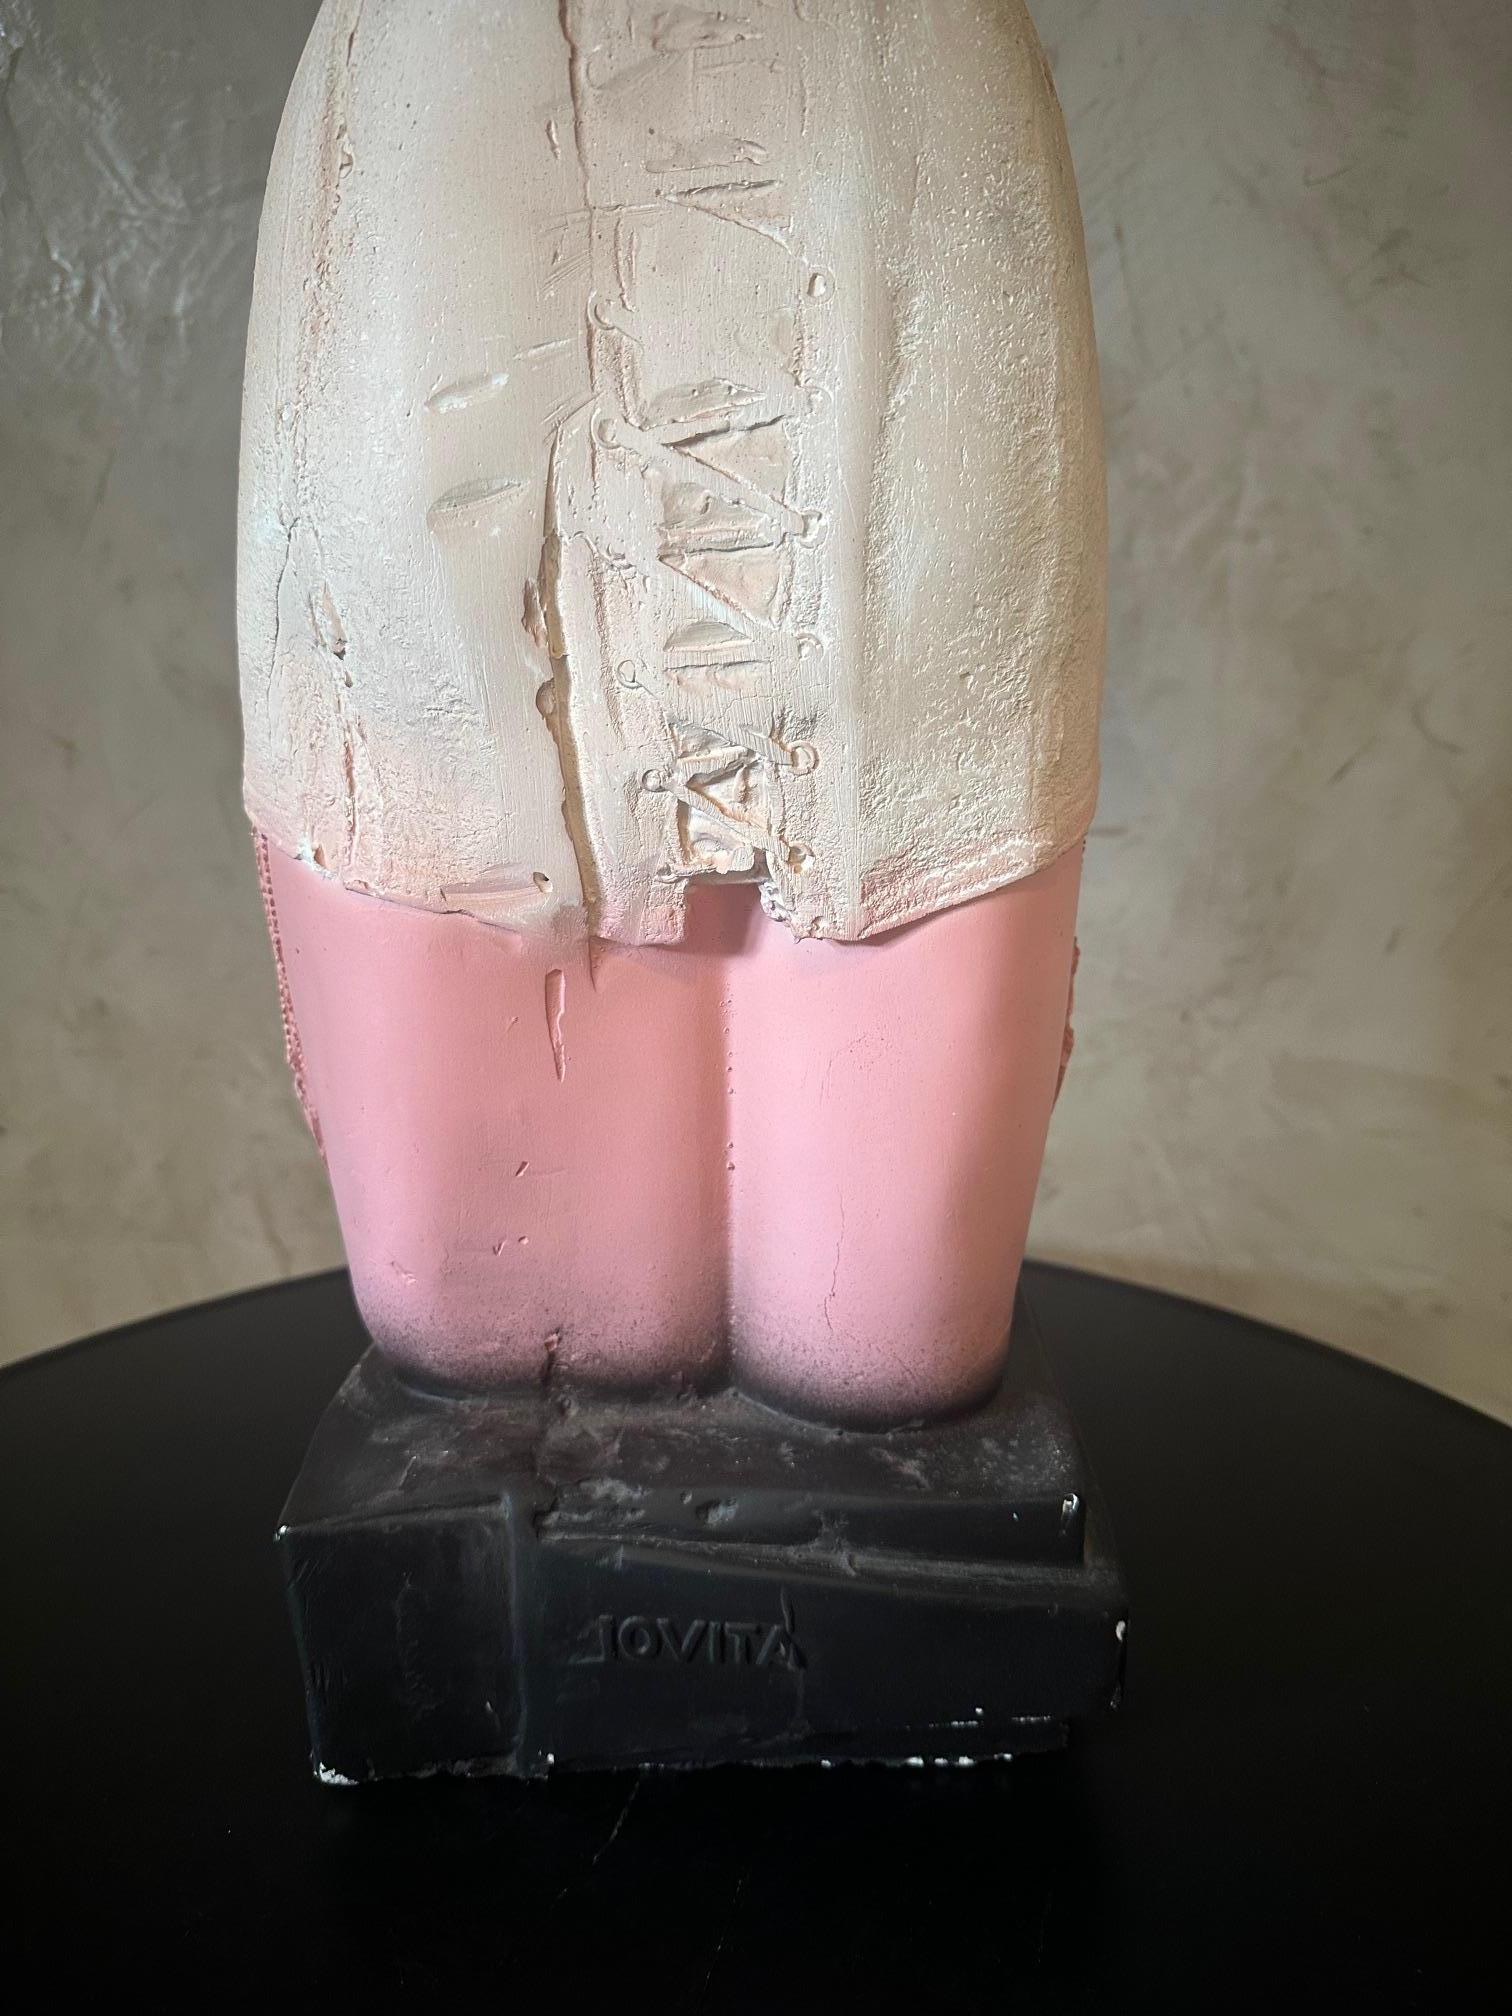 20th century French Plaster Bust For Dior Advertisement, 1950s For Sale 7